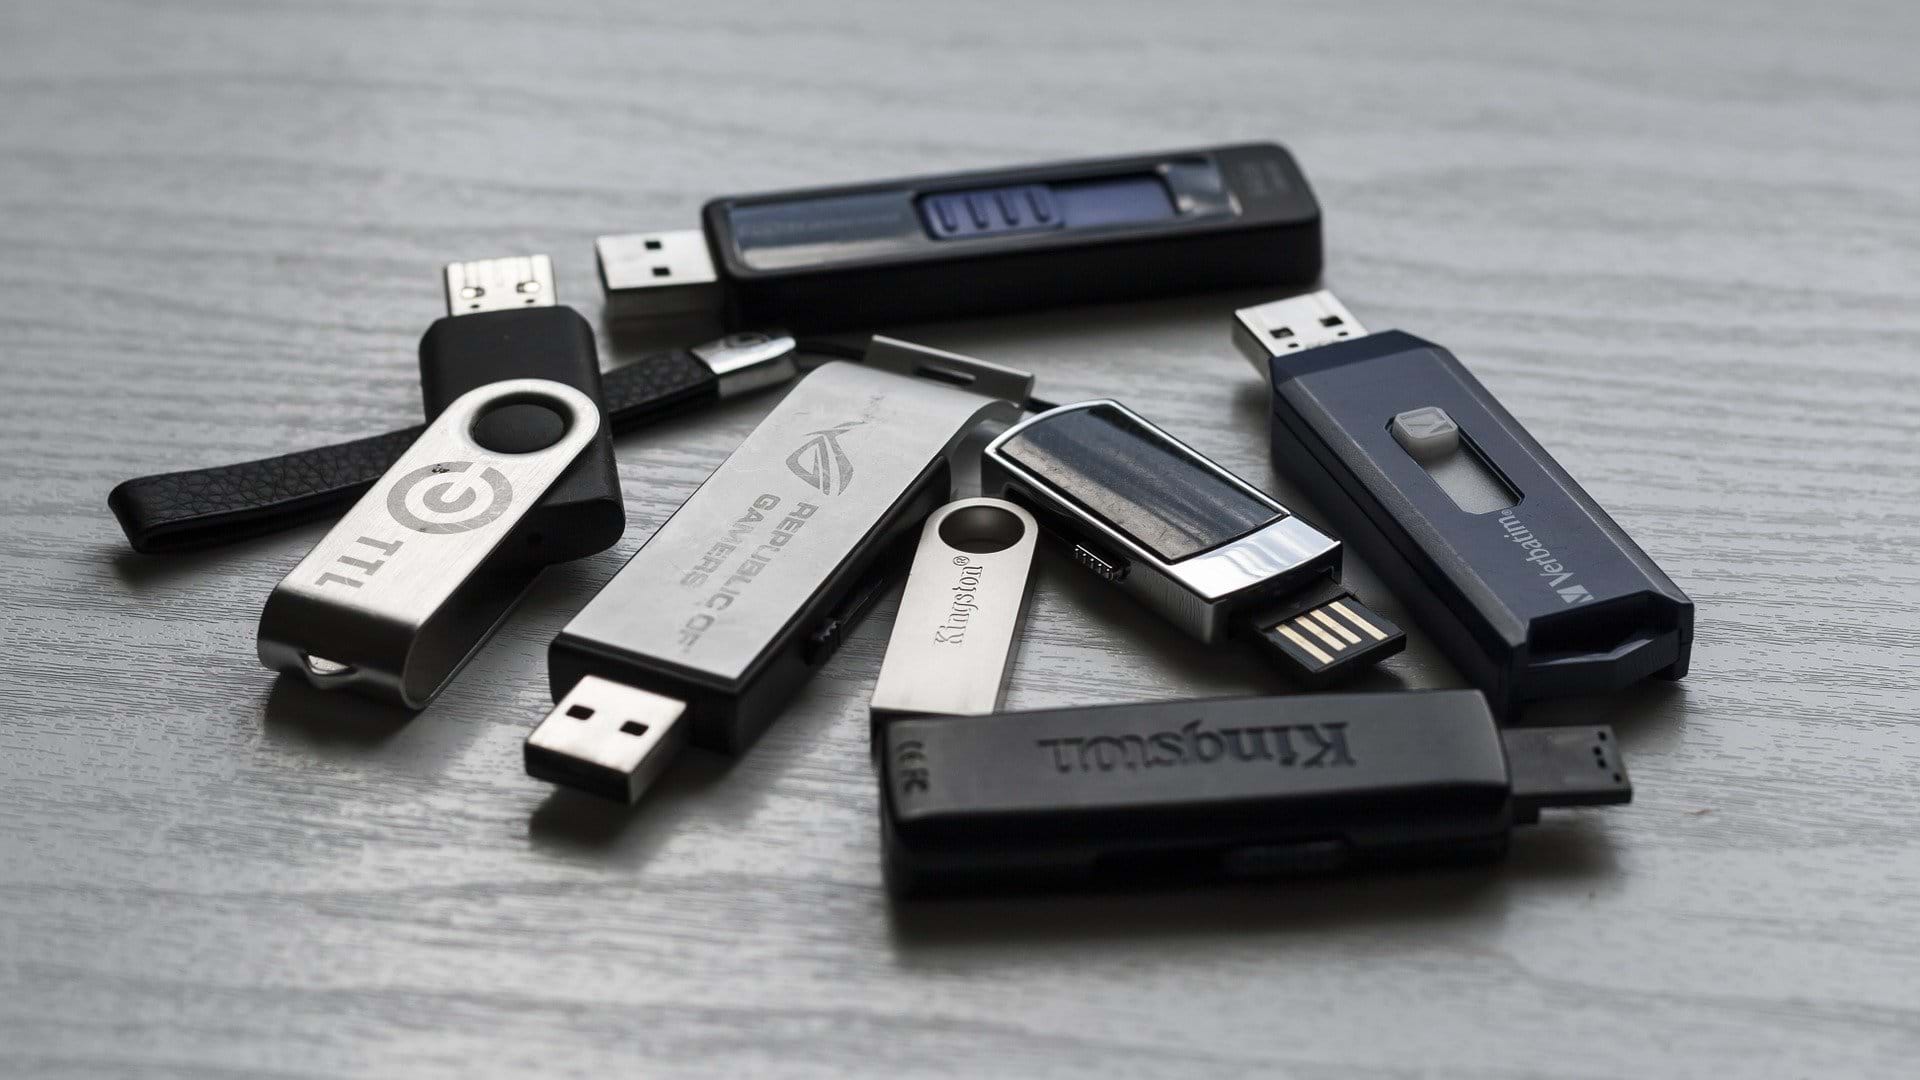 A pile of USB drives